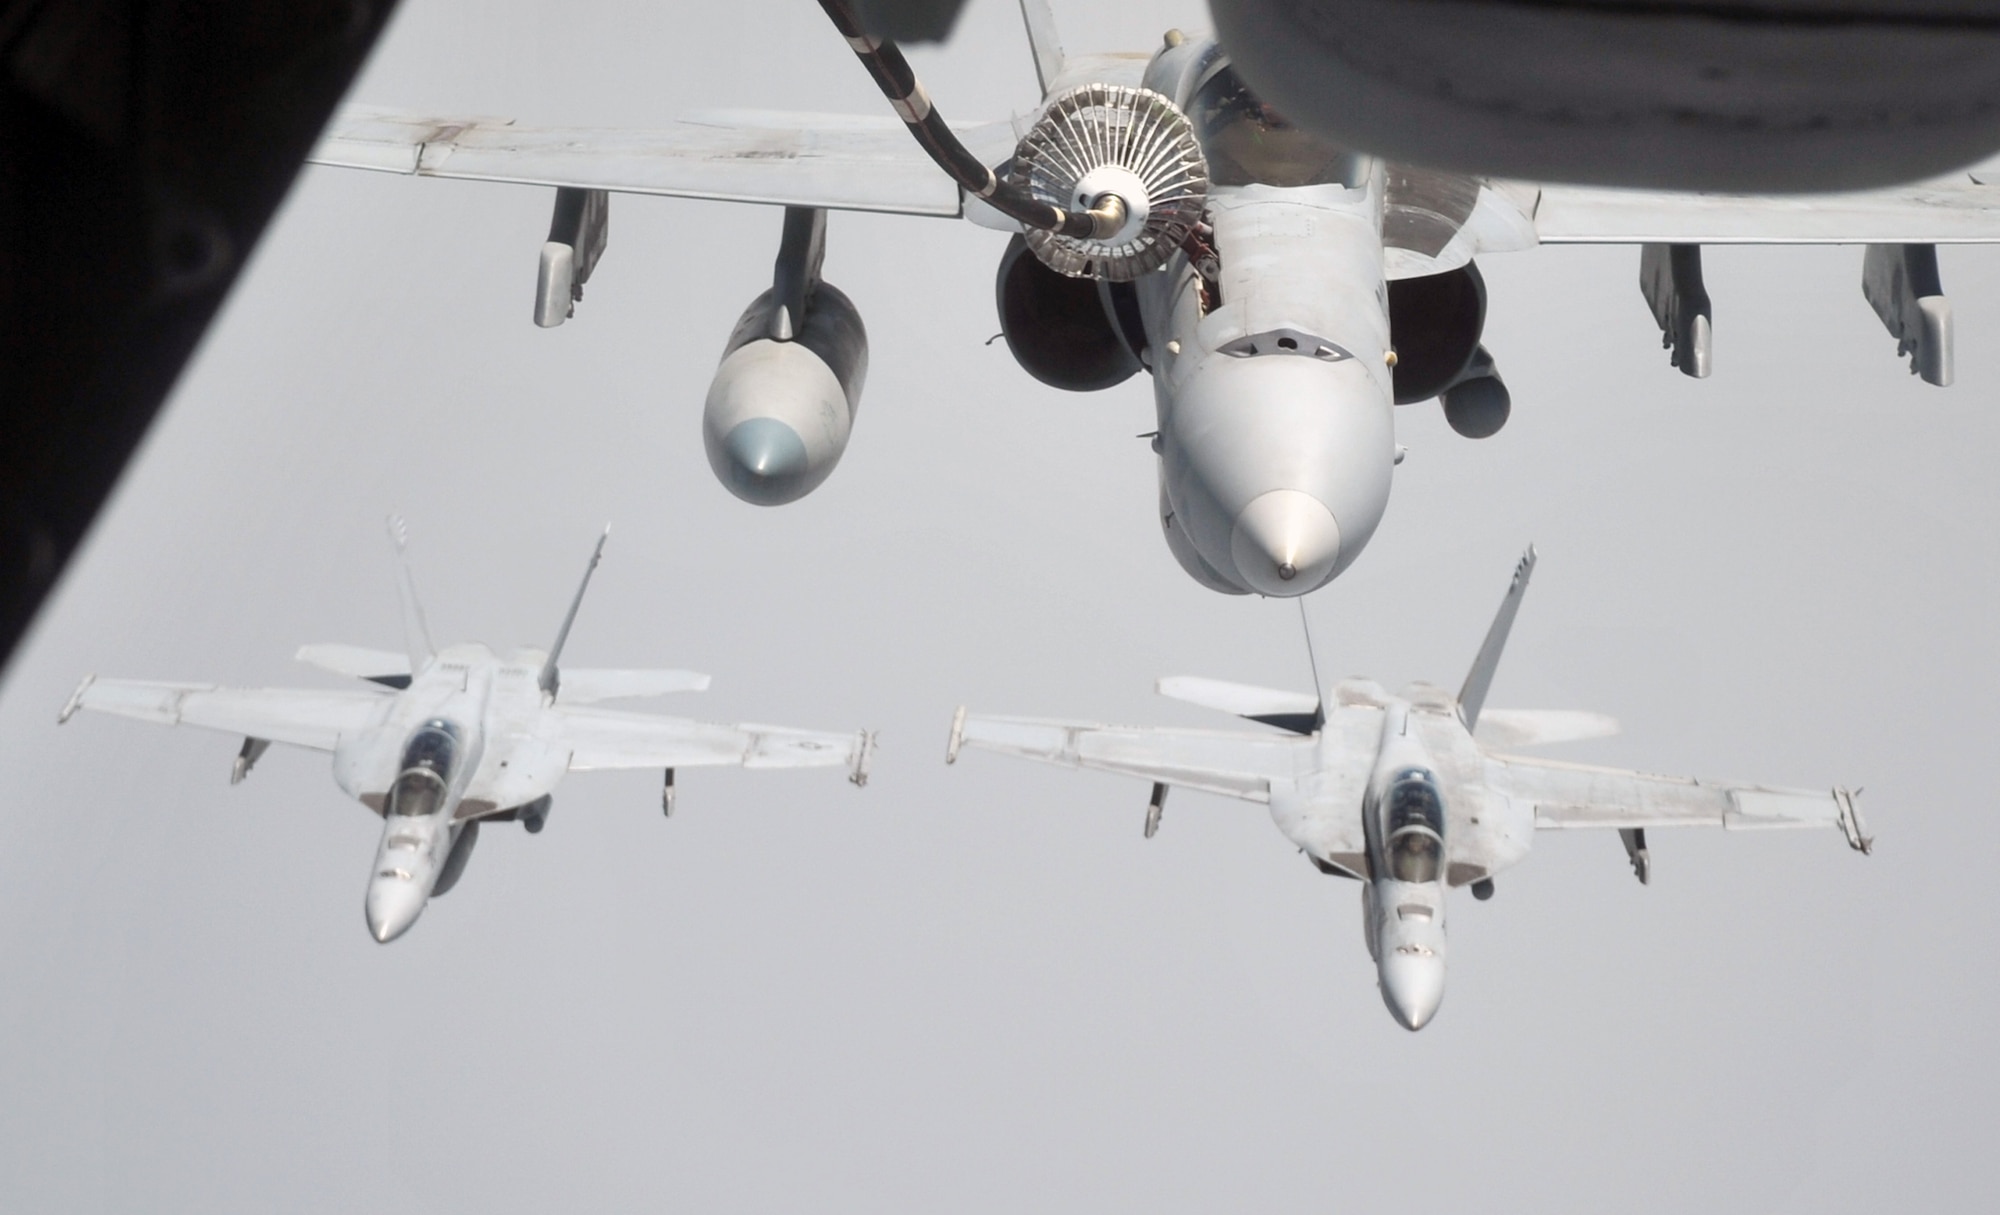 A U.S. Navy F-18 is refueled by a KC-10 Extender from the 908th Expeditionary Air Refueling Squadron during an air refueling mission in the U.S. Central Command area of responsibility on April 24, 2010. In the first three months of 2010, Airmen supporting the KC-10 deployed air refueling in the U.S. Central Command area of responsibility flew more than 1,000 sorties offl-loading more than 108 million pounds of fuel to more than 6,600 aircraft in support of combat operations. The 908th EARS, as part of the 380th Air Expeditionary Wing, supports operations Iraqi Freedom and Enduring Freedom and the Combined Joint Task Force-Horn of Africa. (U.S. Air Force Photo/Master Sgt. Scott T. Sturkol/Released)